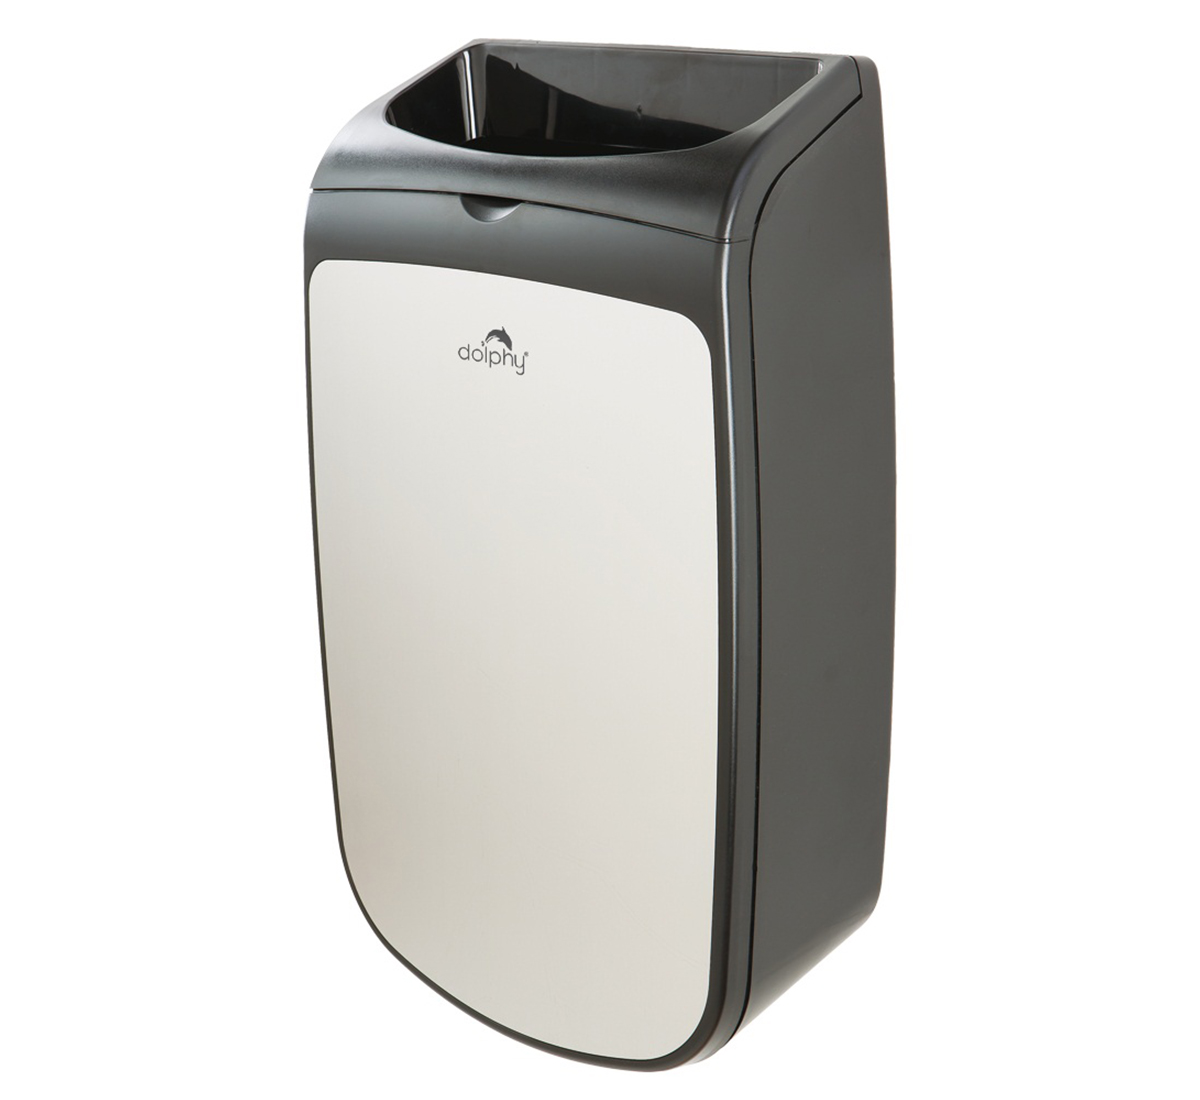 Black Waste Receptacle With Cover Plate